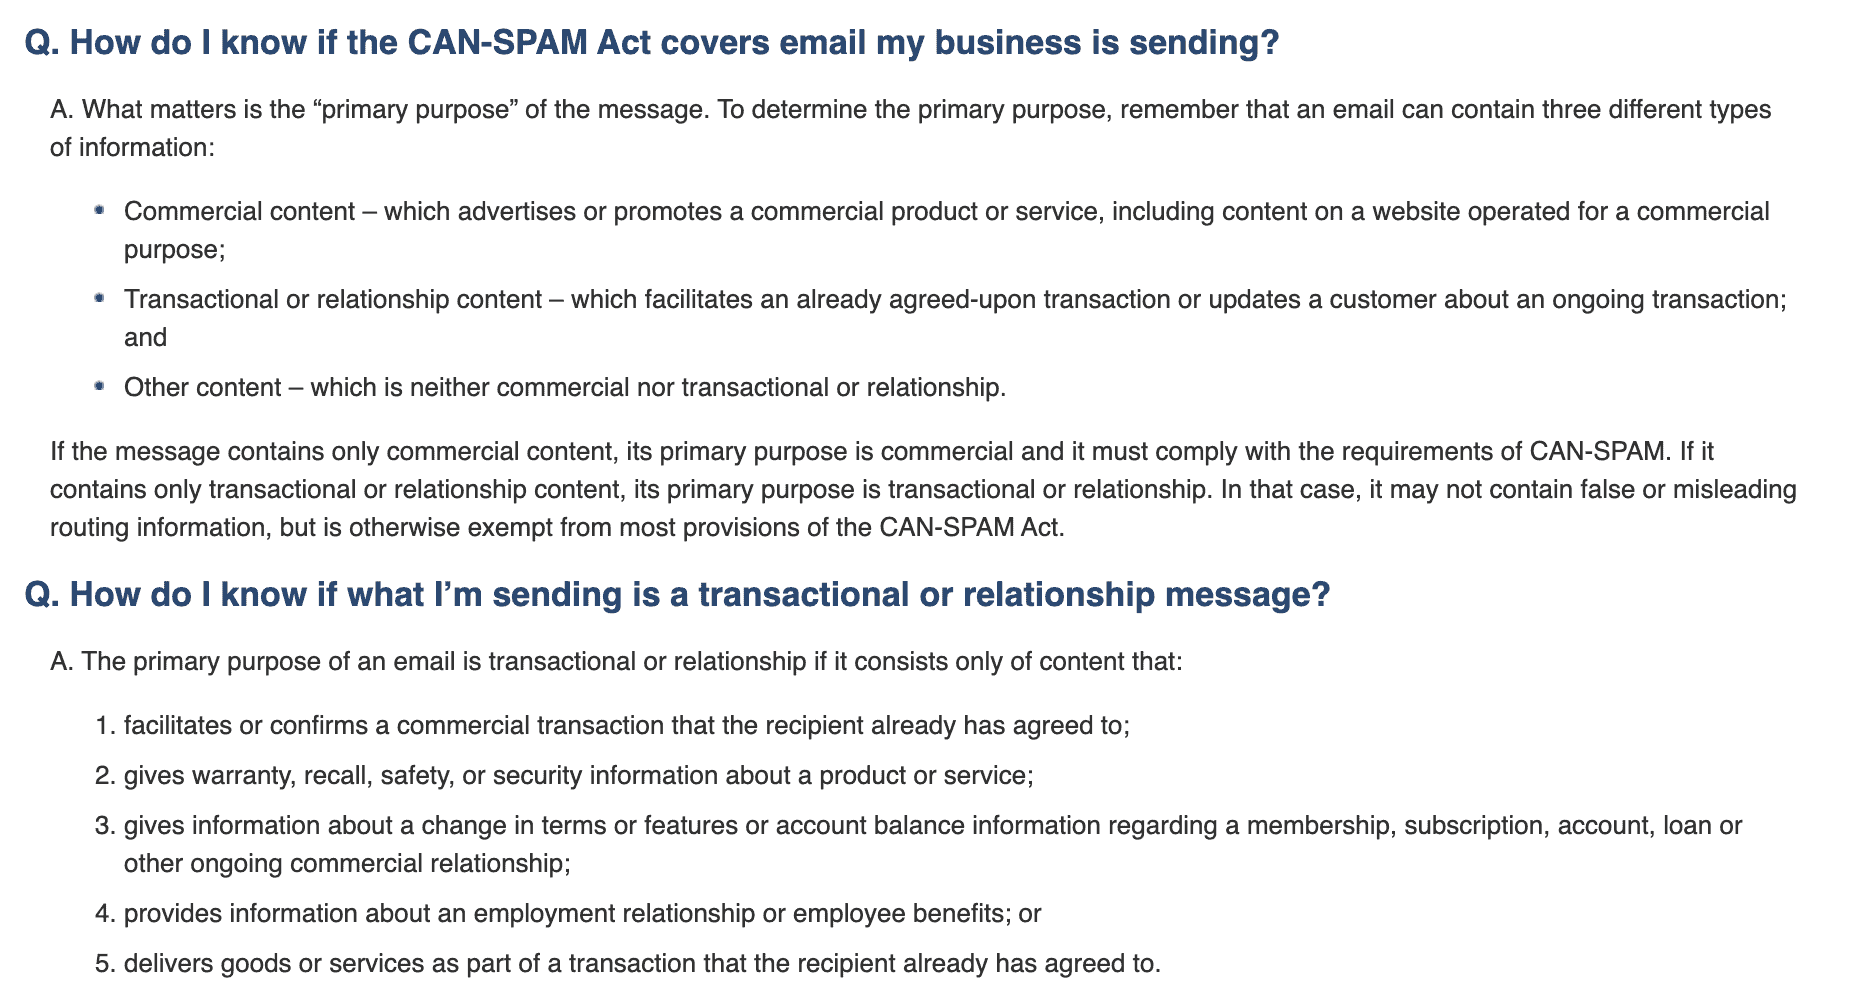 Info on CAN-SPAM Act